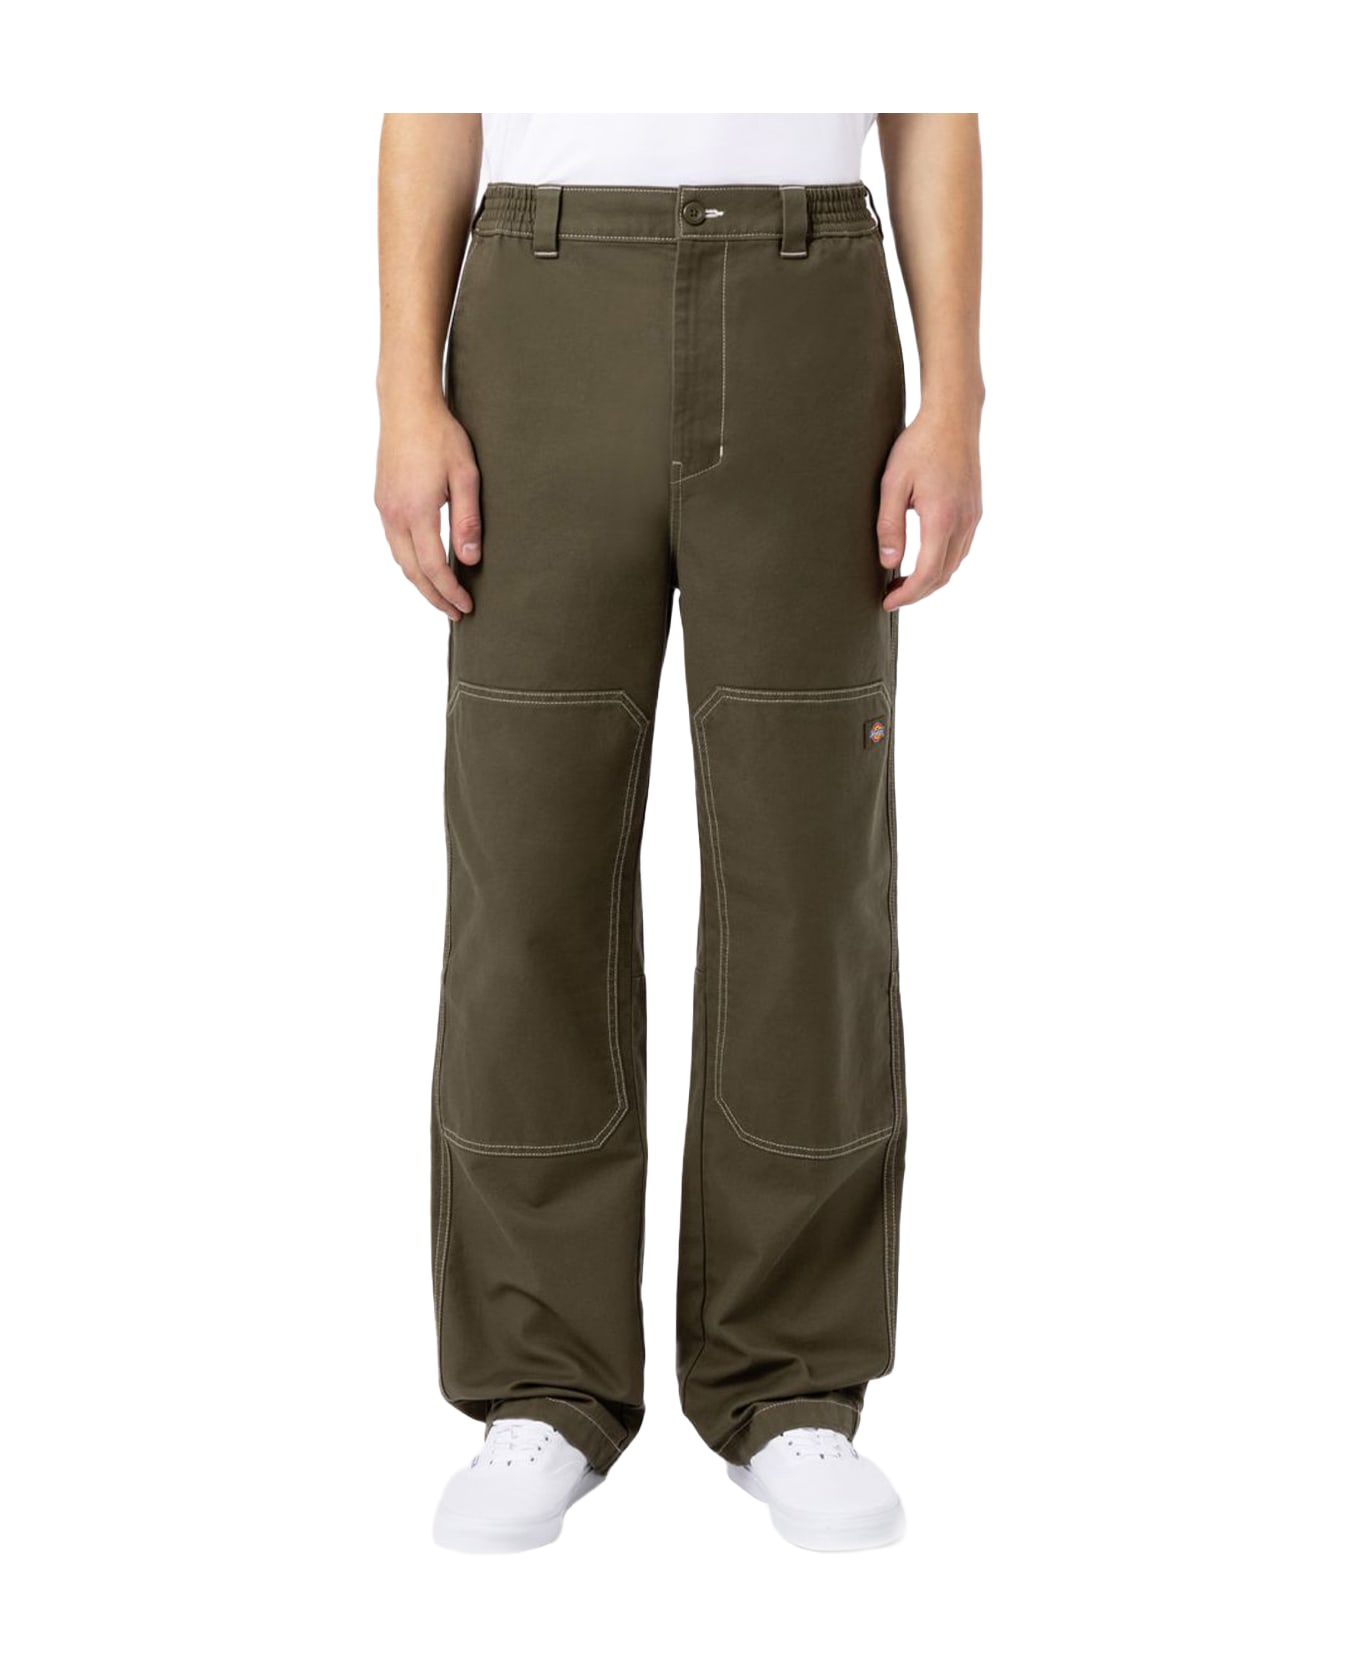 Dickies Florala Pant Military Green Cotton Double Knee Work Pant - Florala Pant - ARMY GREEN